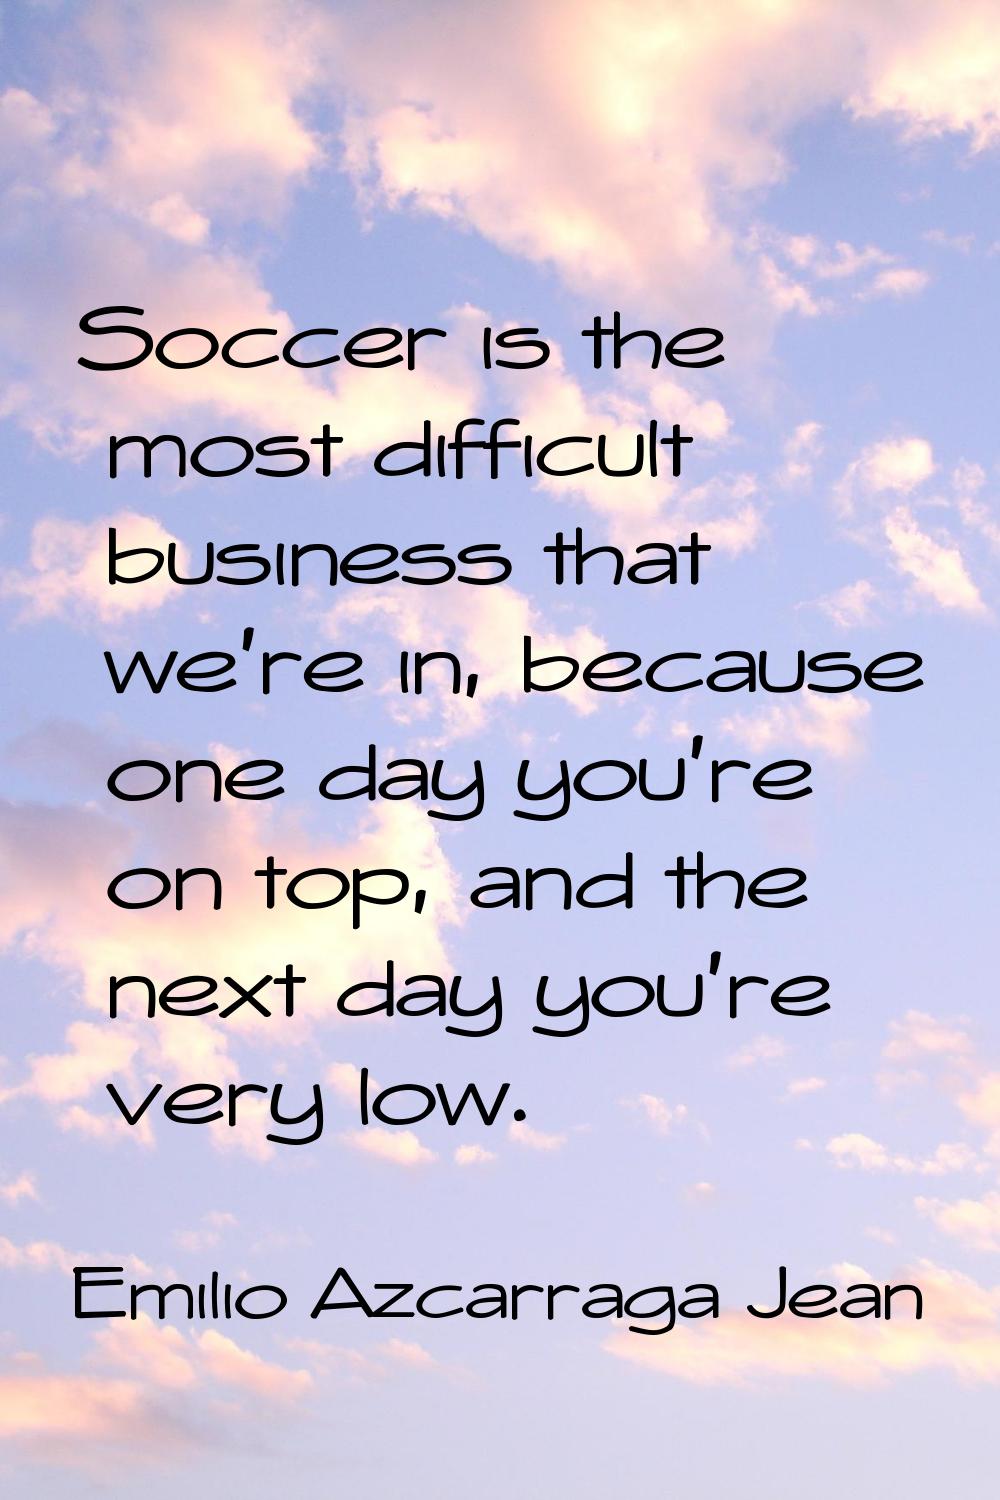 Soccer is the most difficult business that we're in, because one day you're on top, and the next da